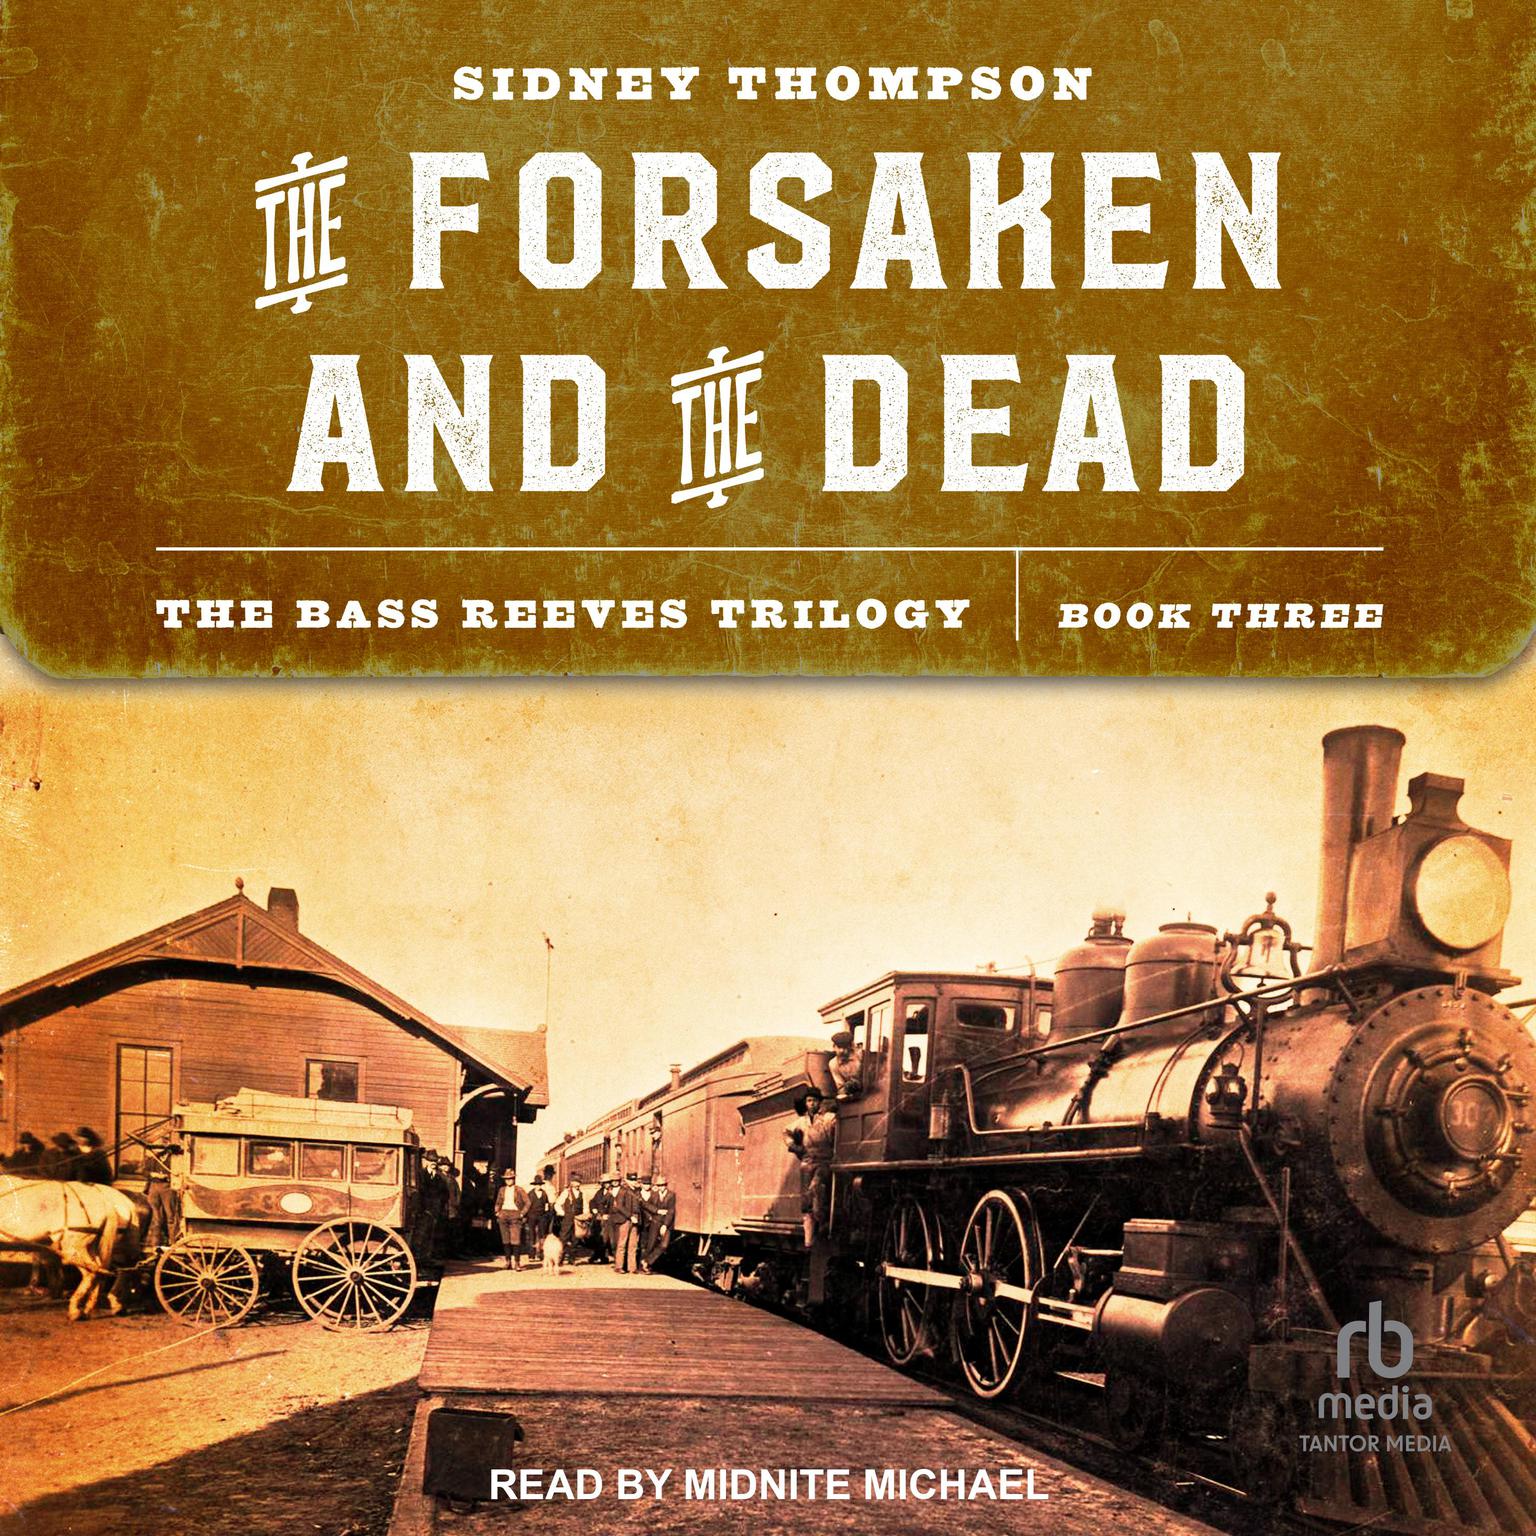 The Forsaken and the Dead: The Bass Reeves Trilogy, Book Three Audiobook, by Sidney Thompson